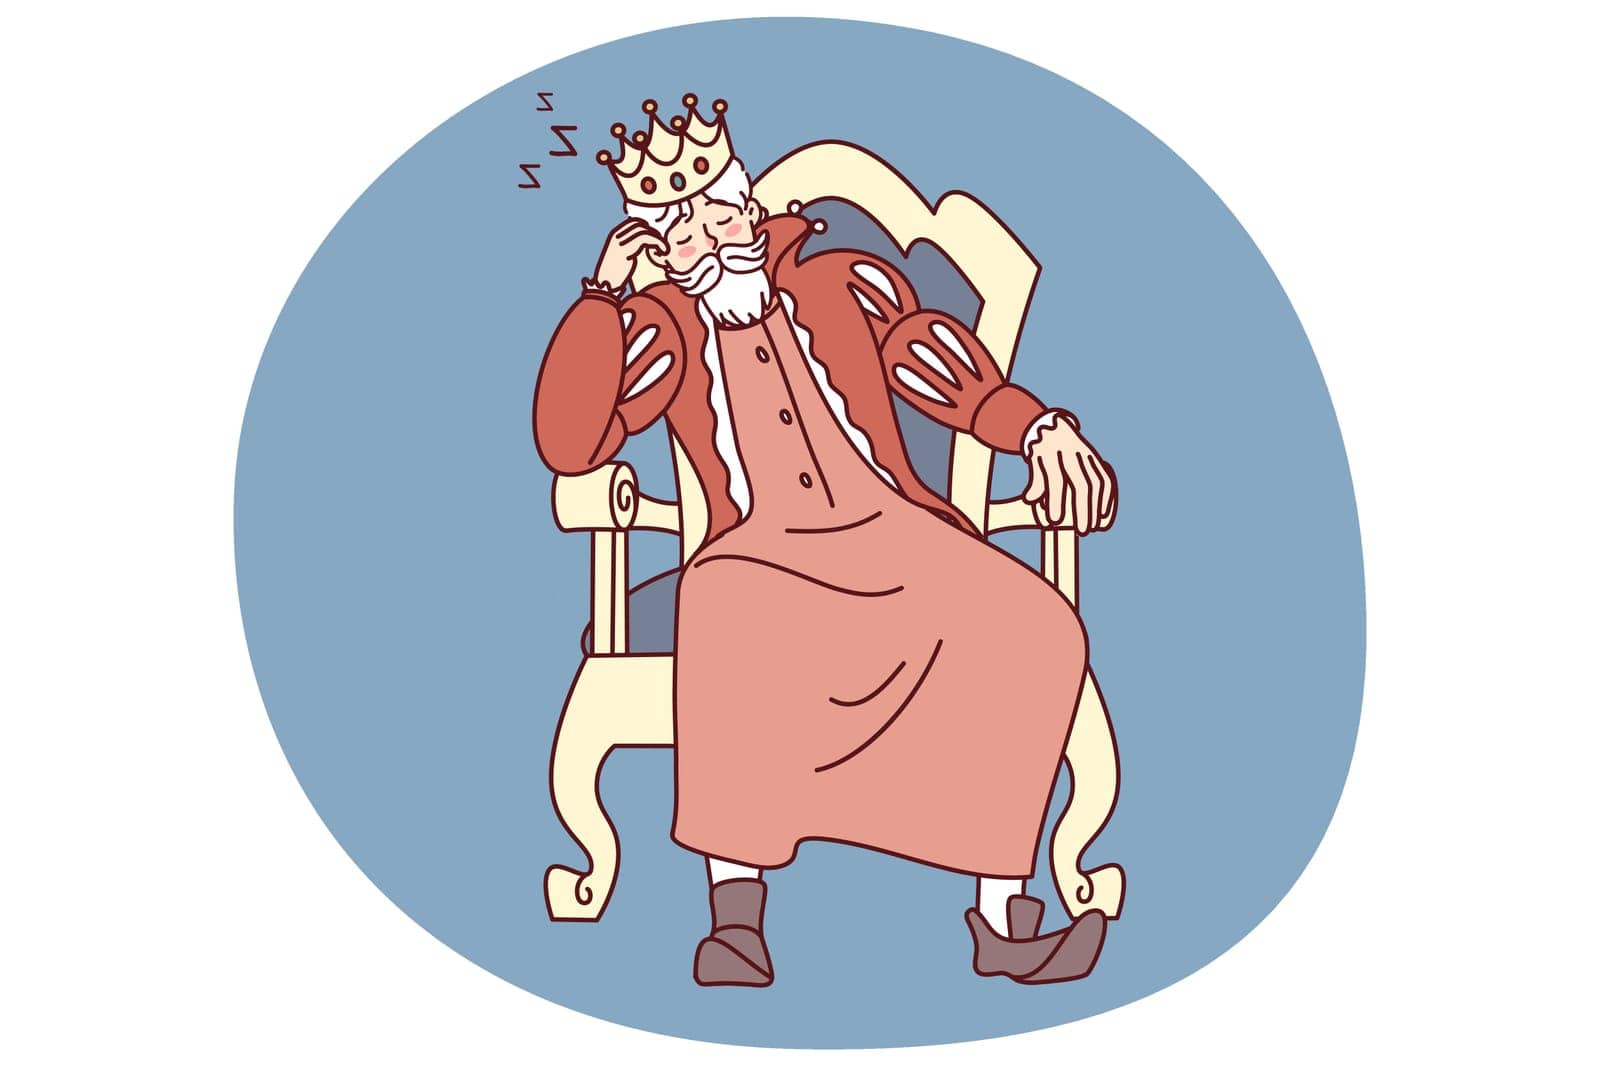 Bored king with crown on head fall asleep in chair. Tired monarch sleeping in armchair. Exhaustion and fatigue. Vector illustration.